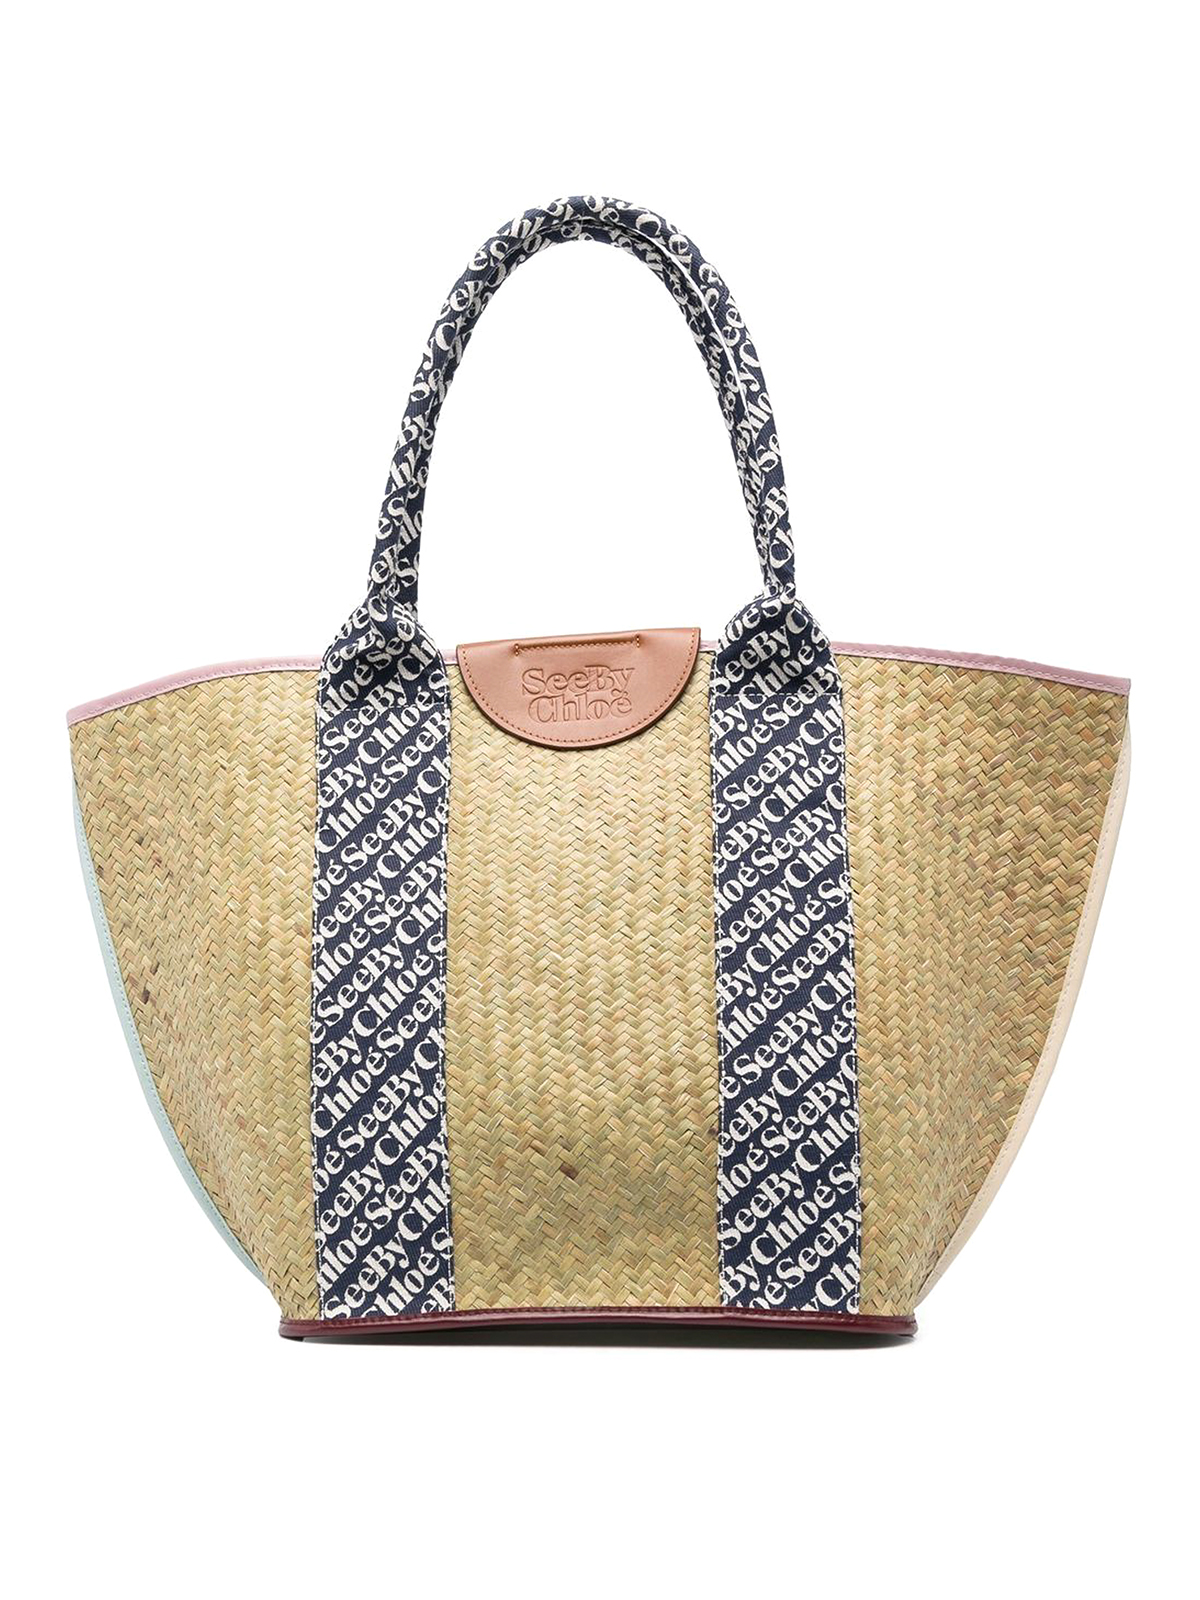 SEE BY CHLOÉ LOGO-PATCH TOTE